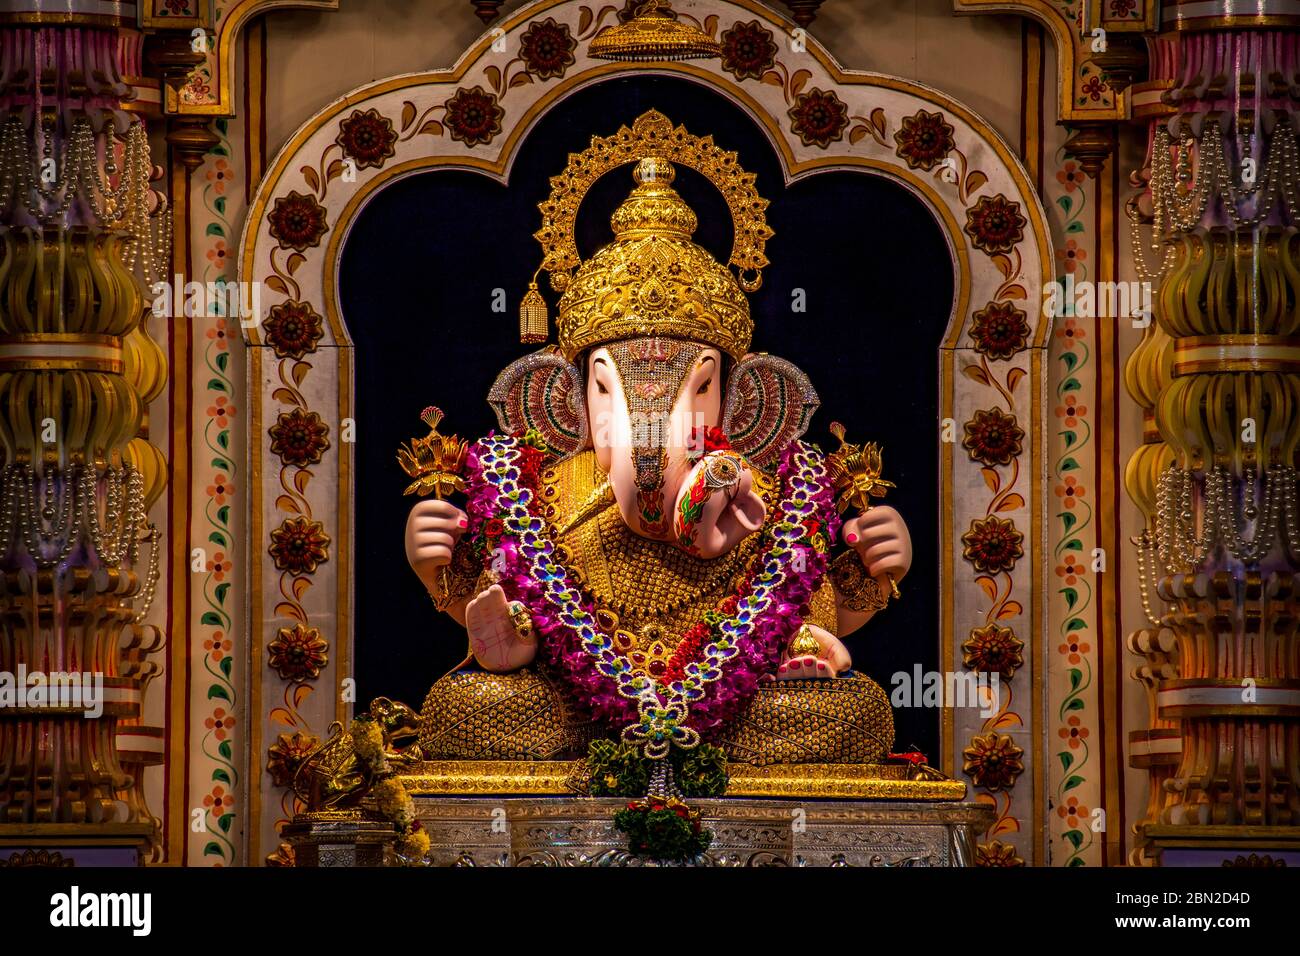 Dagdusheth Ganapati Idol at pune with golden jewellery and